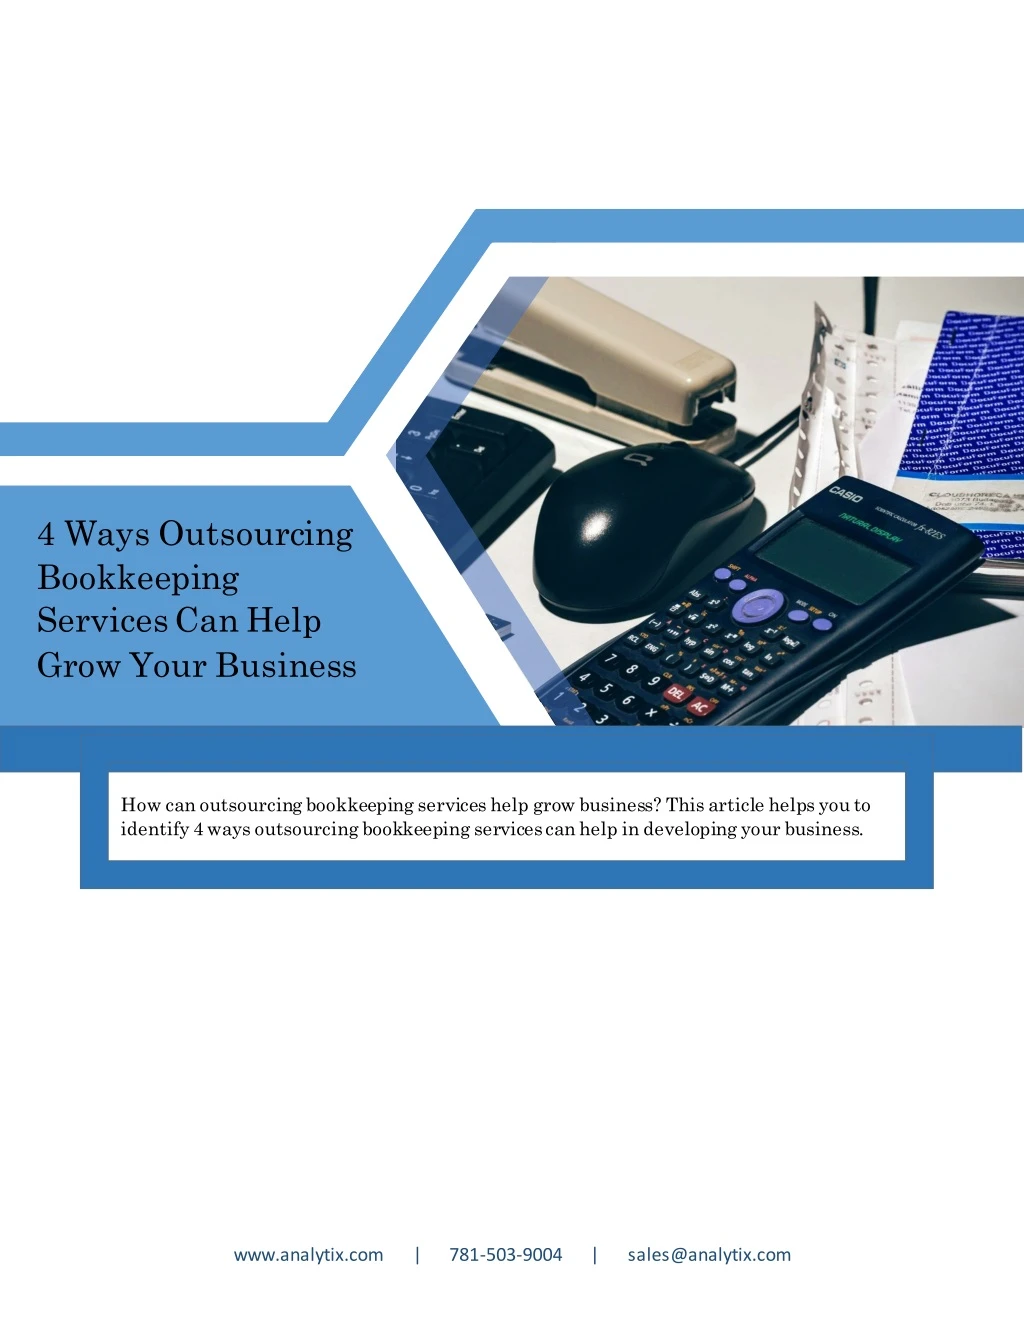 4 ways outsourcing bookkeeping services can help